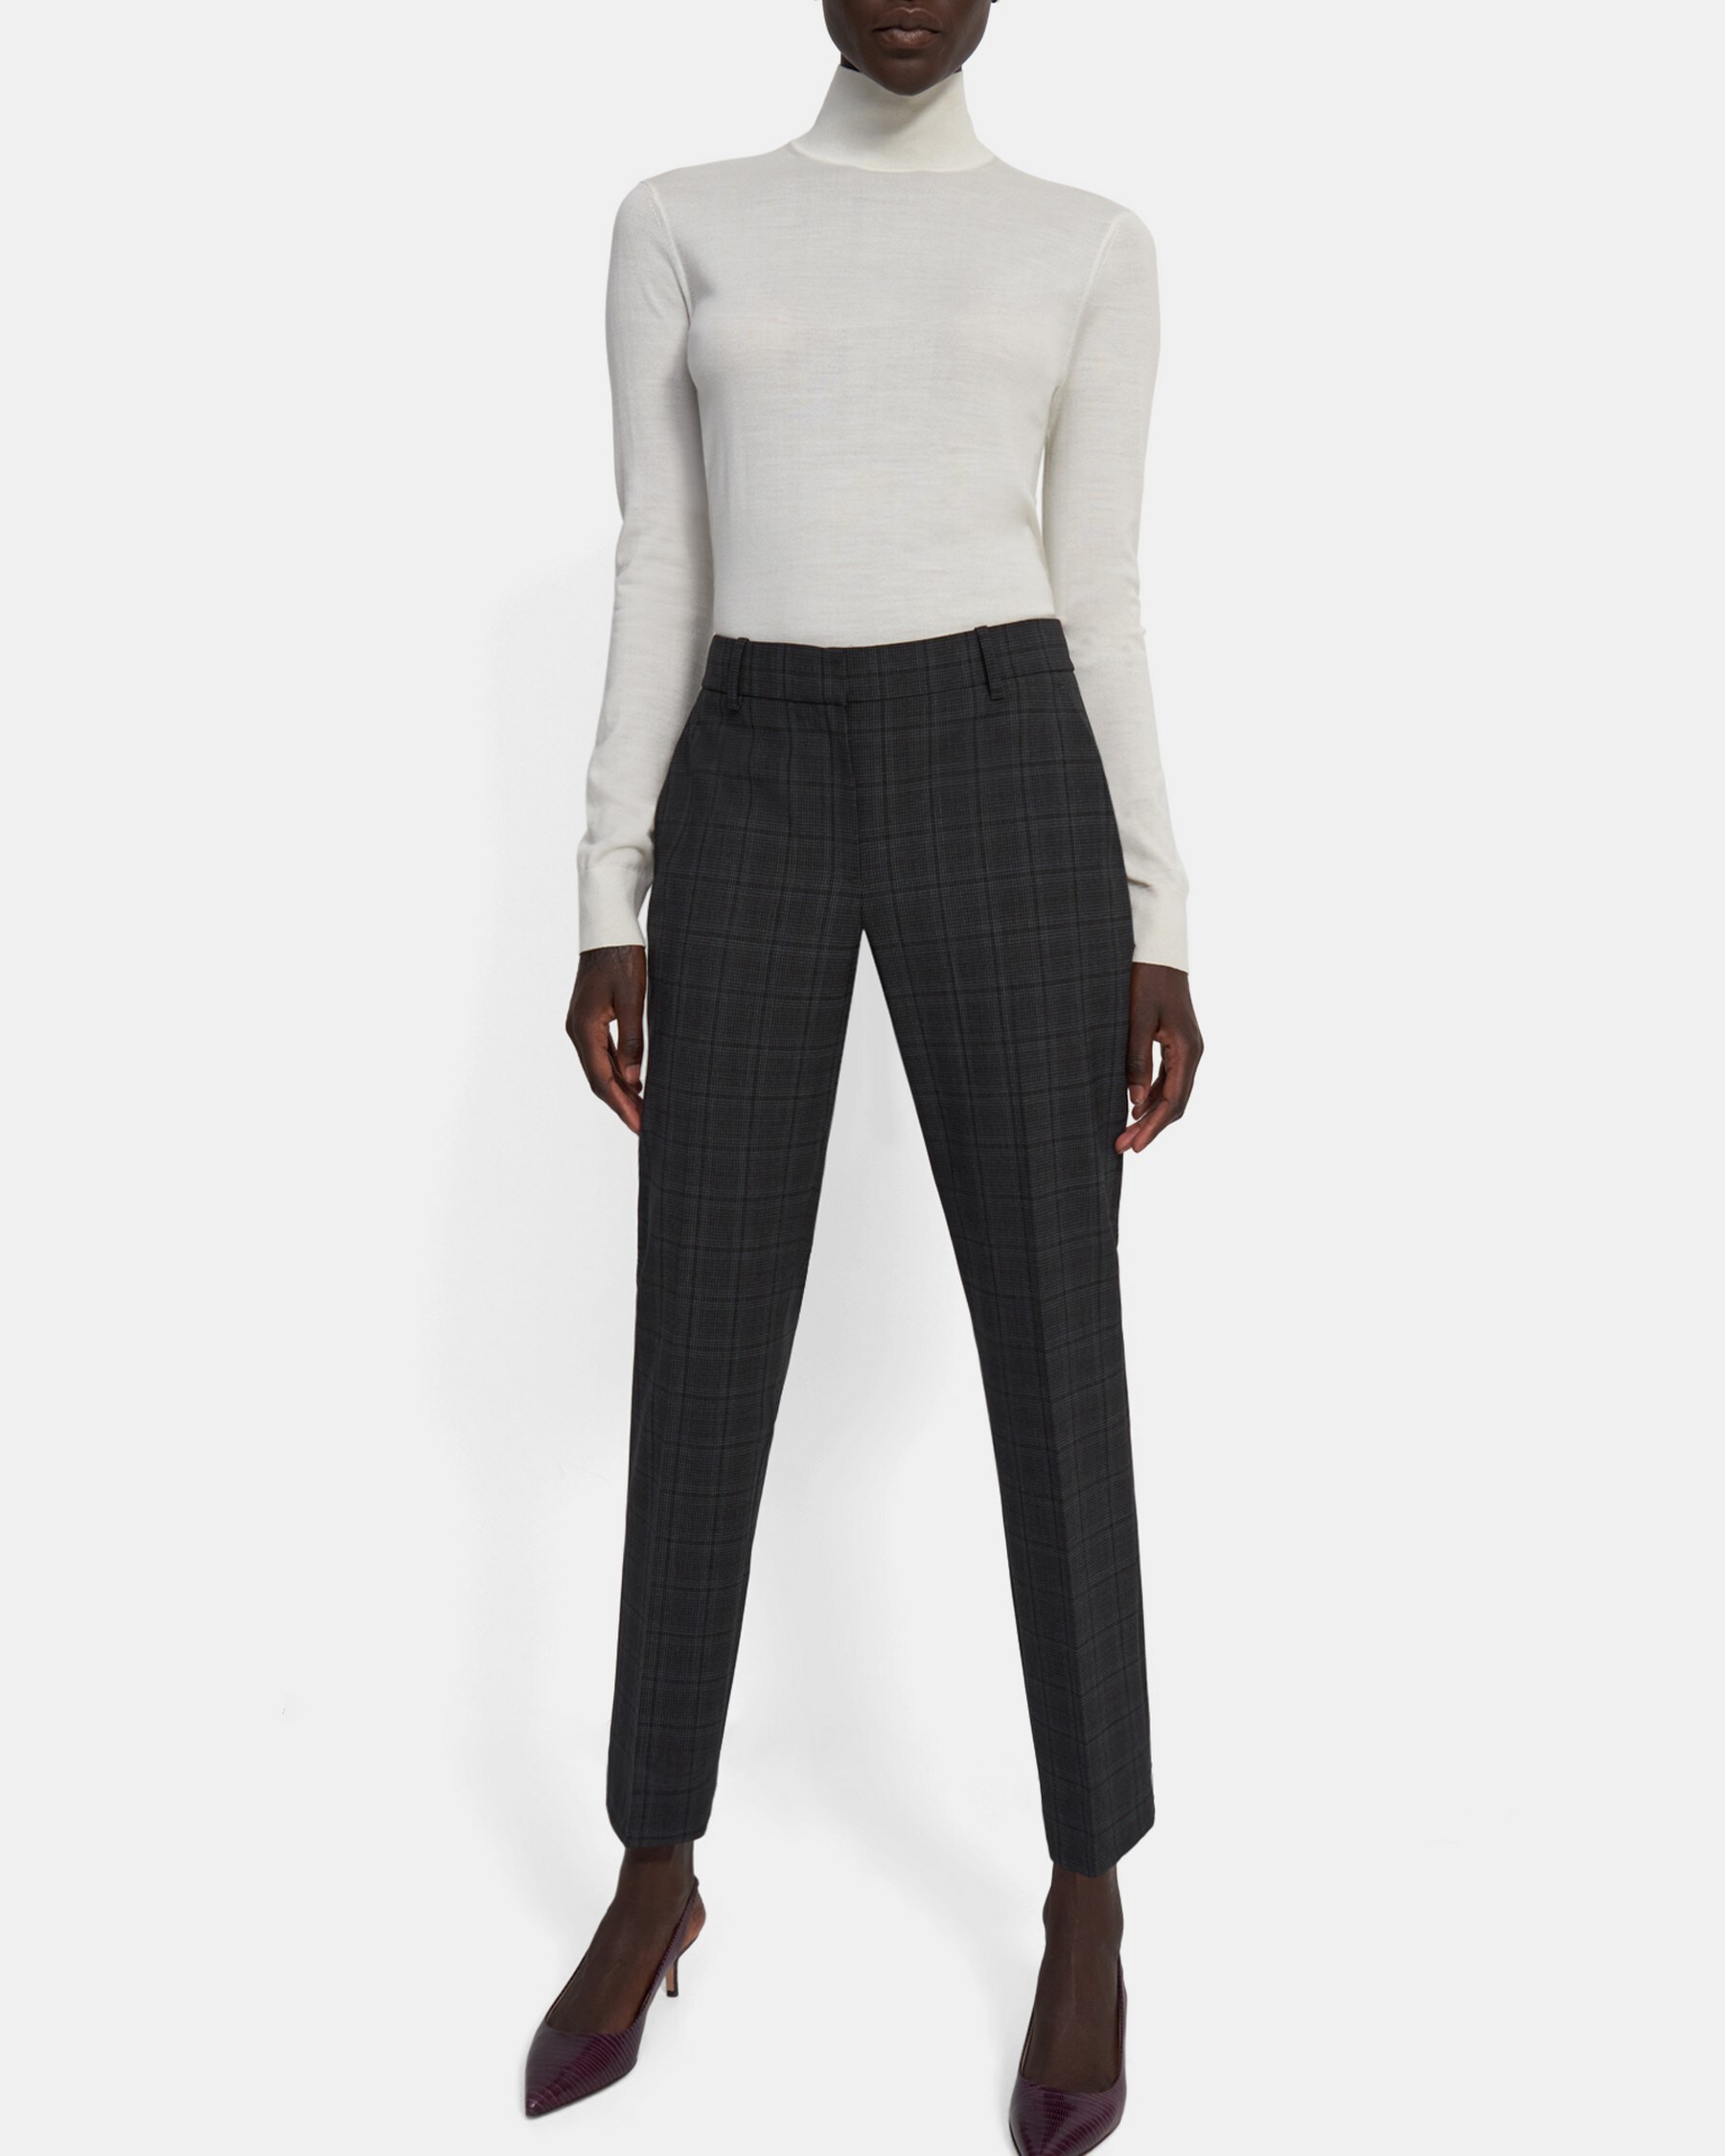 Theory Slim Full Length Pant in Plaid Stretch Wool